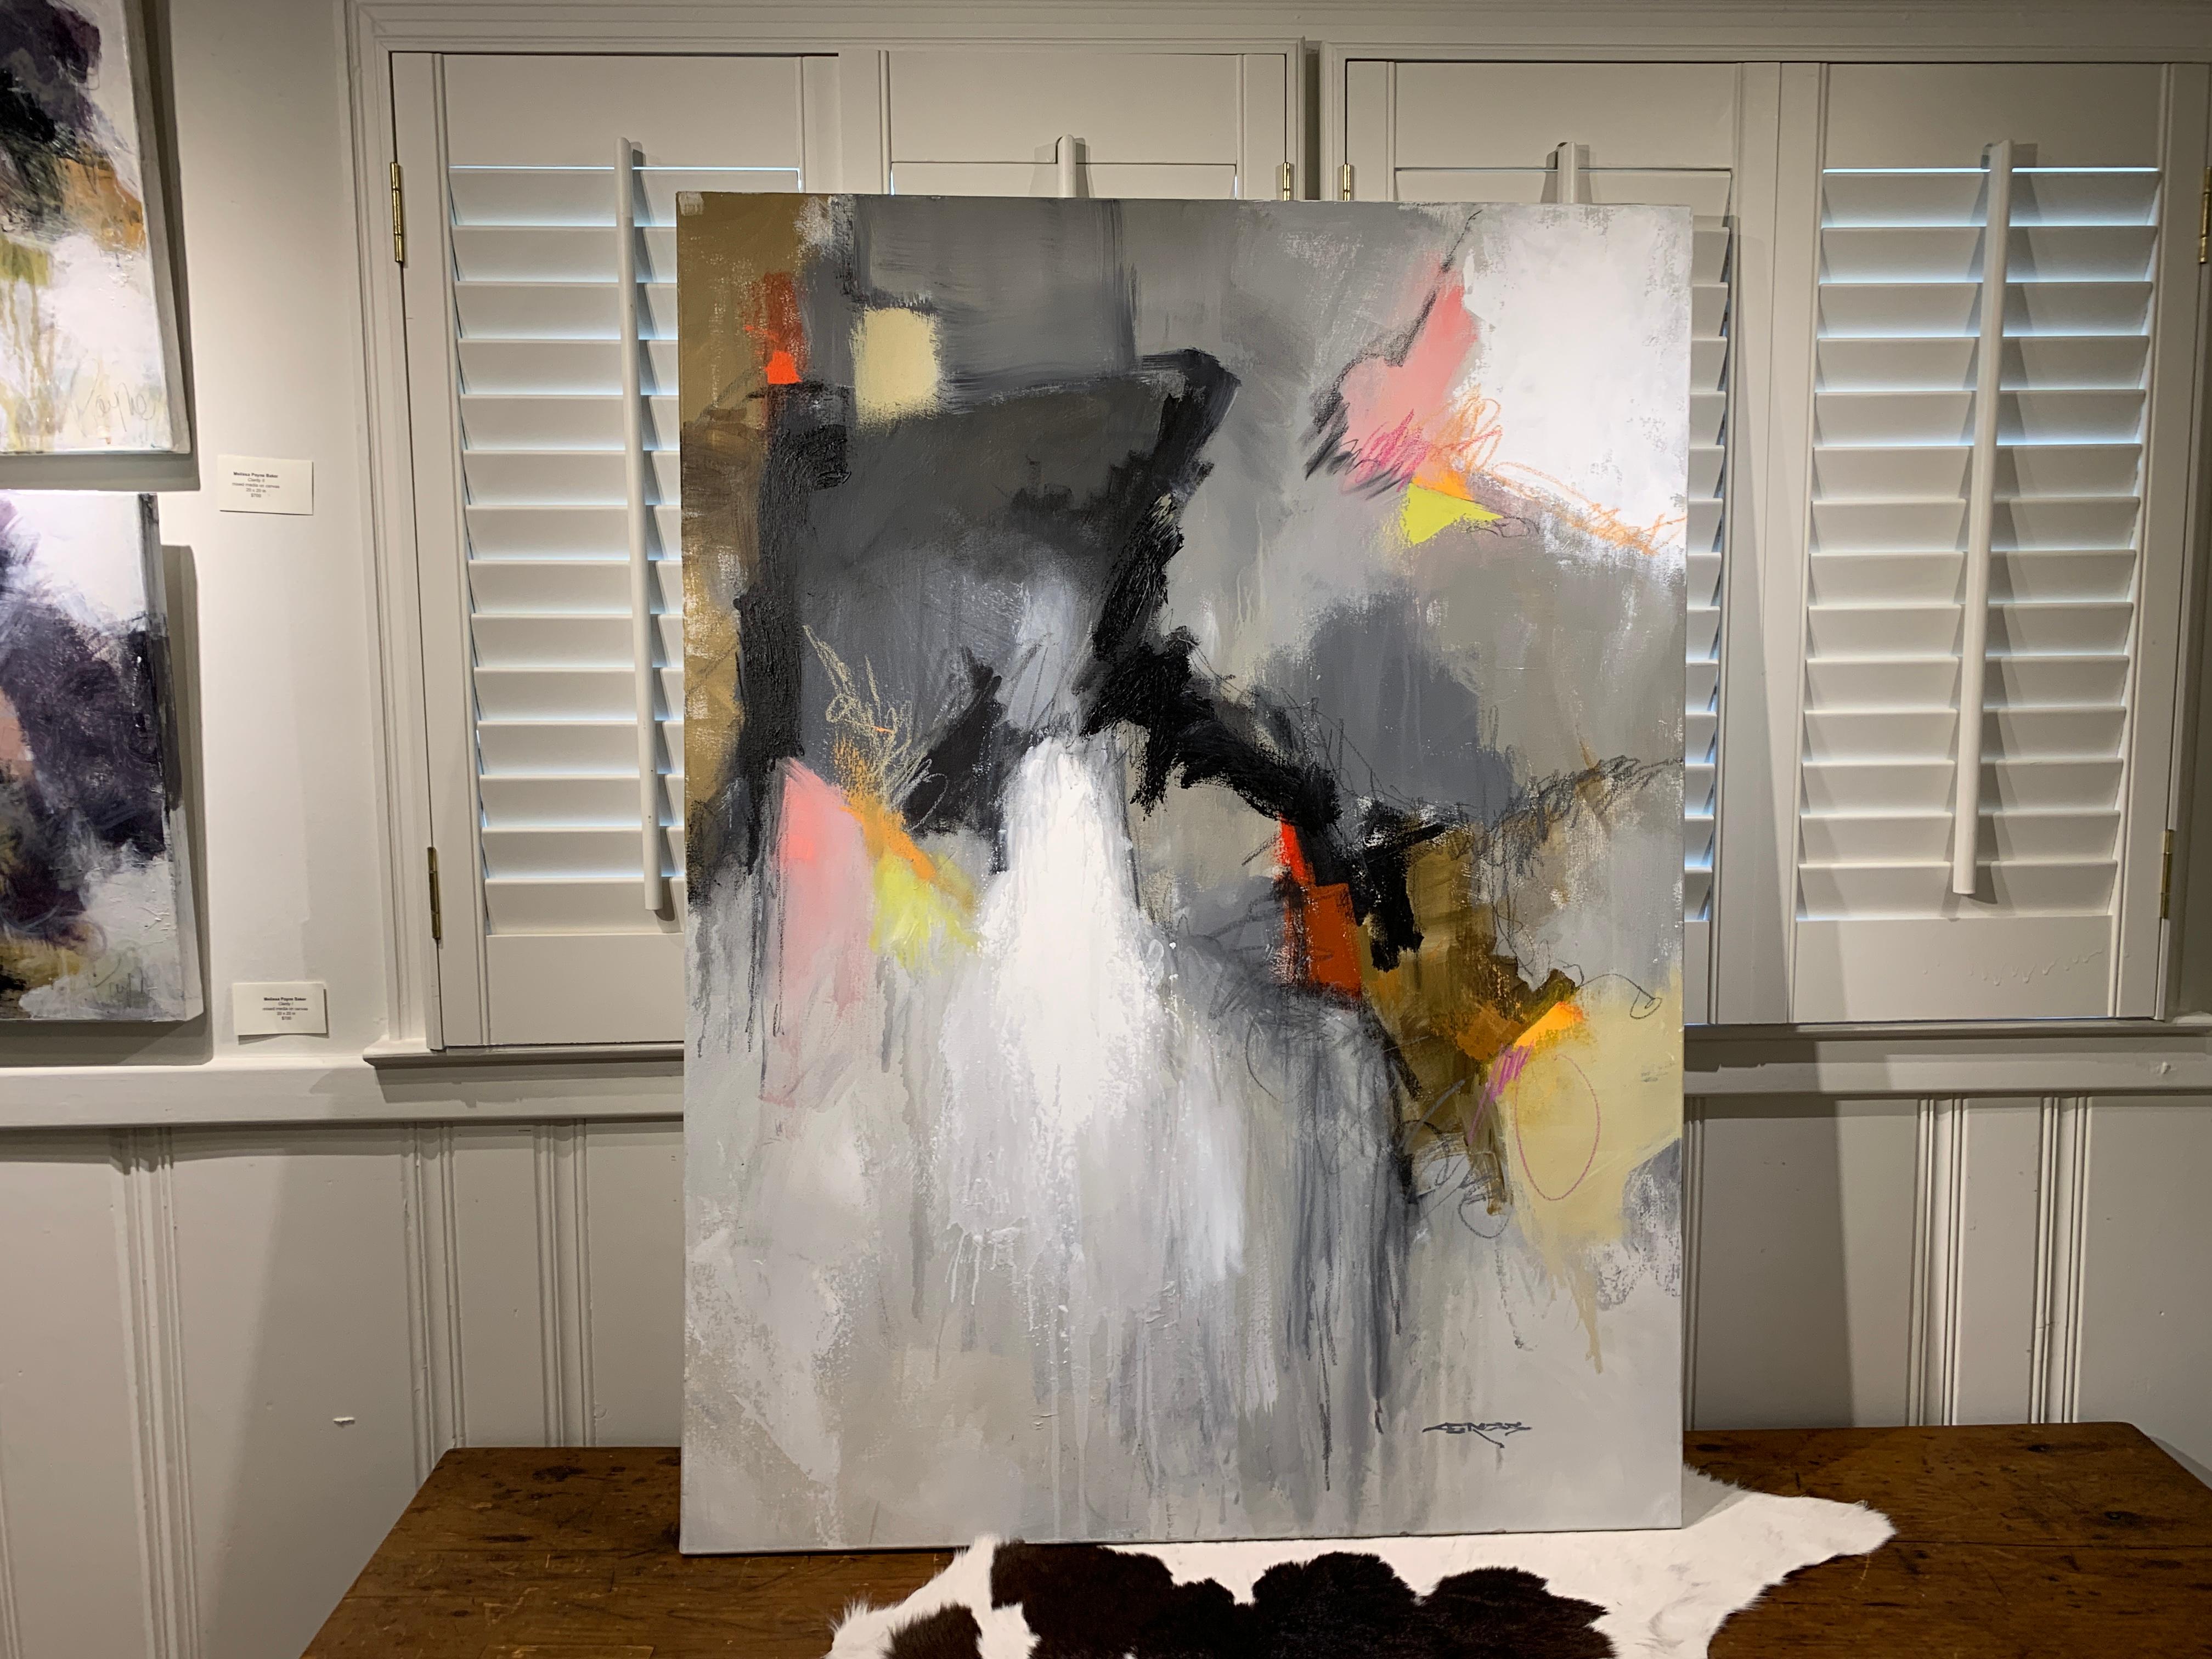 'Rust and Stardust II' is an oil and mixed media on canvas abstract painting of vertical format created by American artist Charles Ross in 2019. Featuring a palette mostly made of gold, black, white, pink and grey tones among others, this abstract